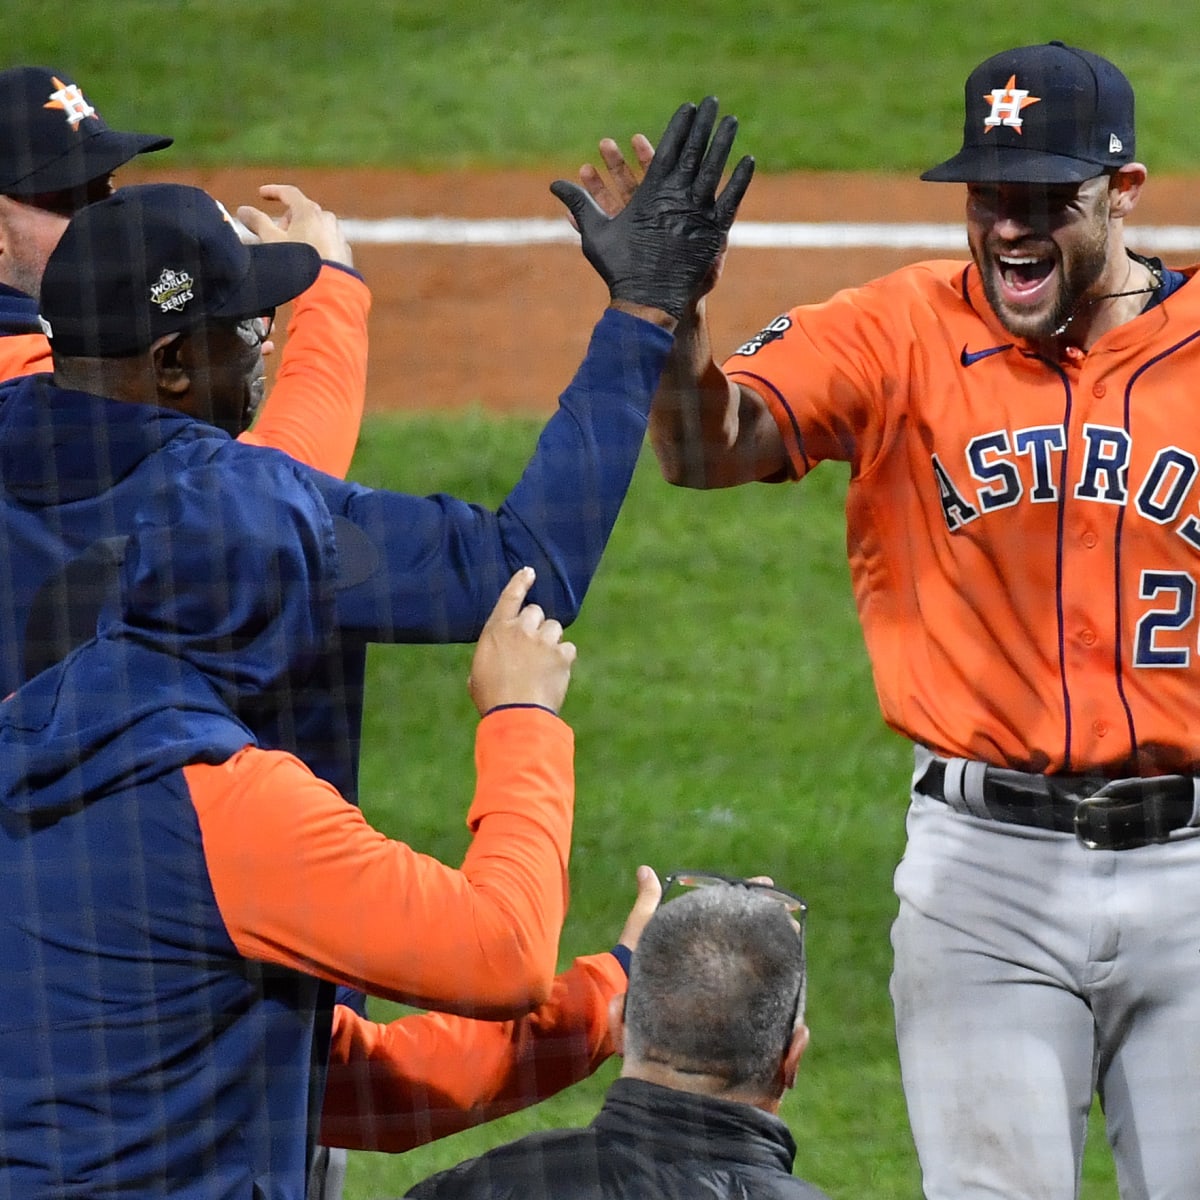 The @Astros win the pivotal Game 3 and are now 1 win away from returning to  the ALCS. #Postseason